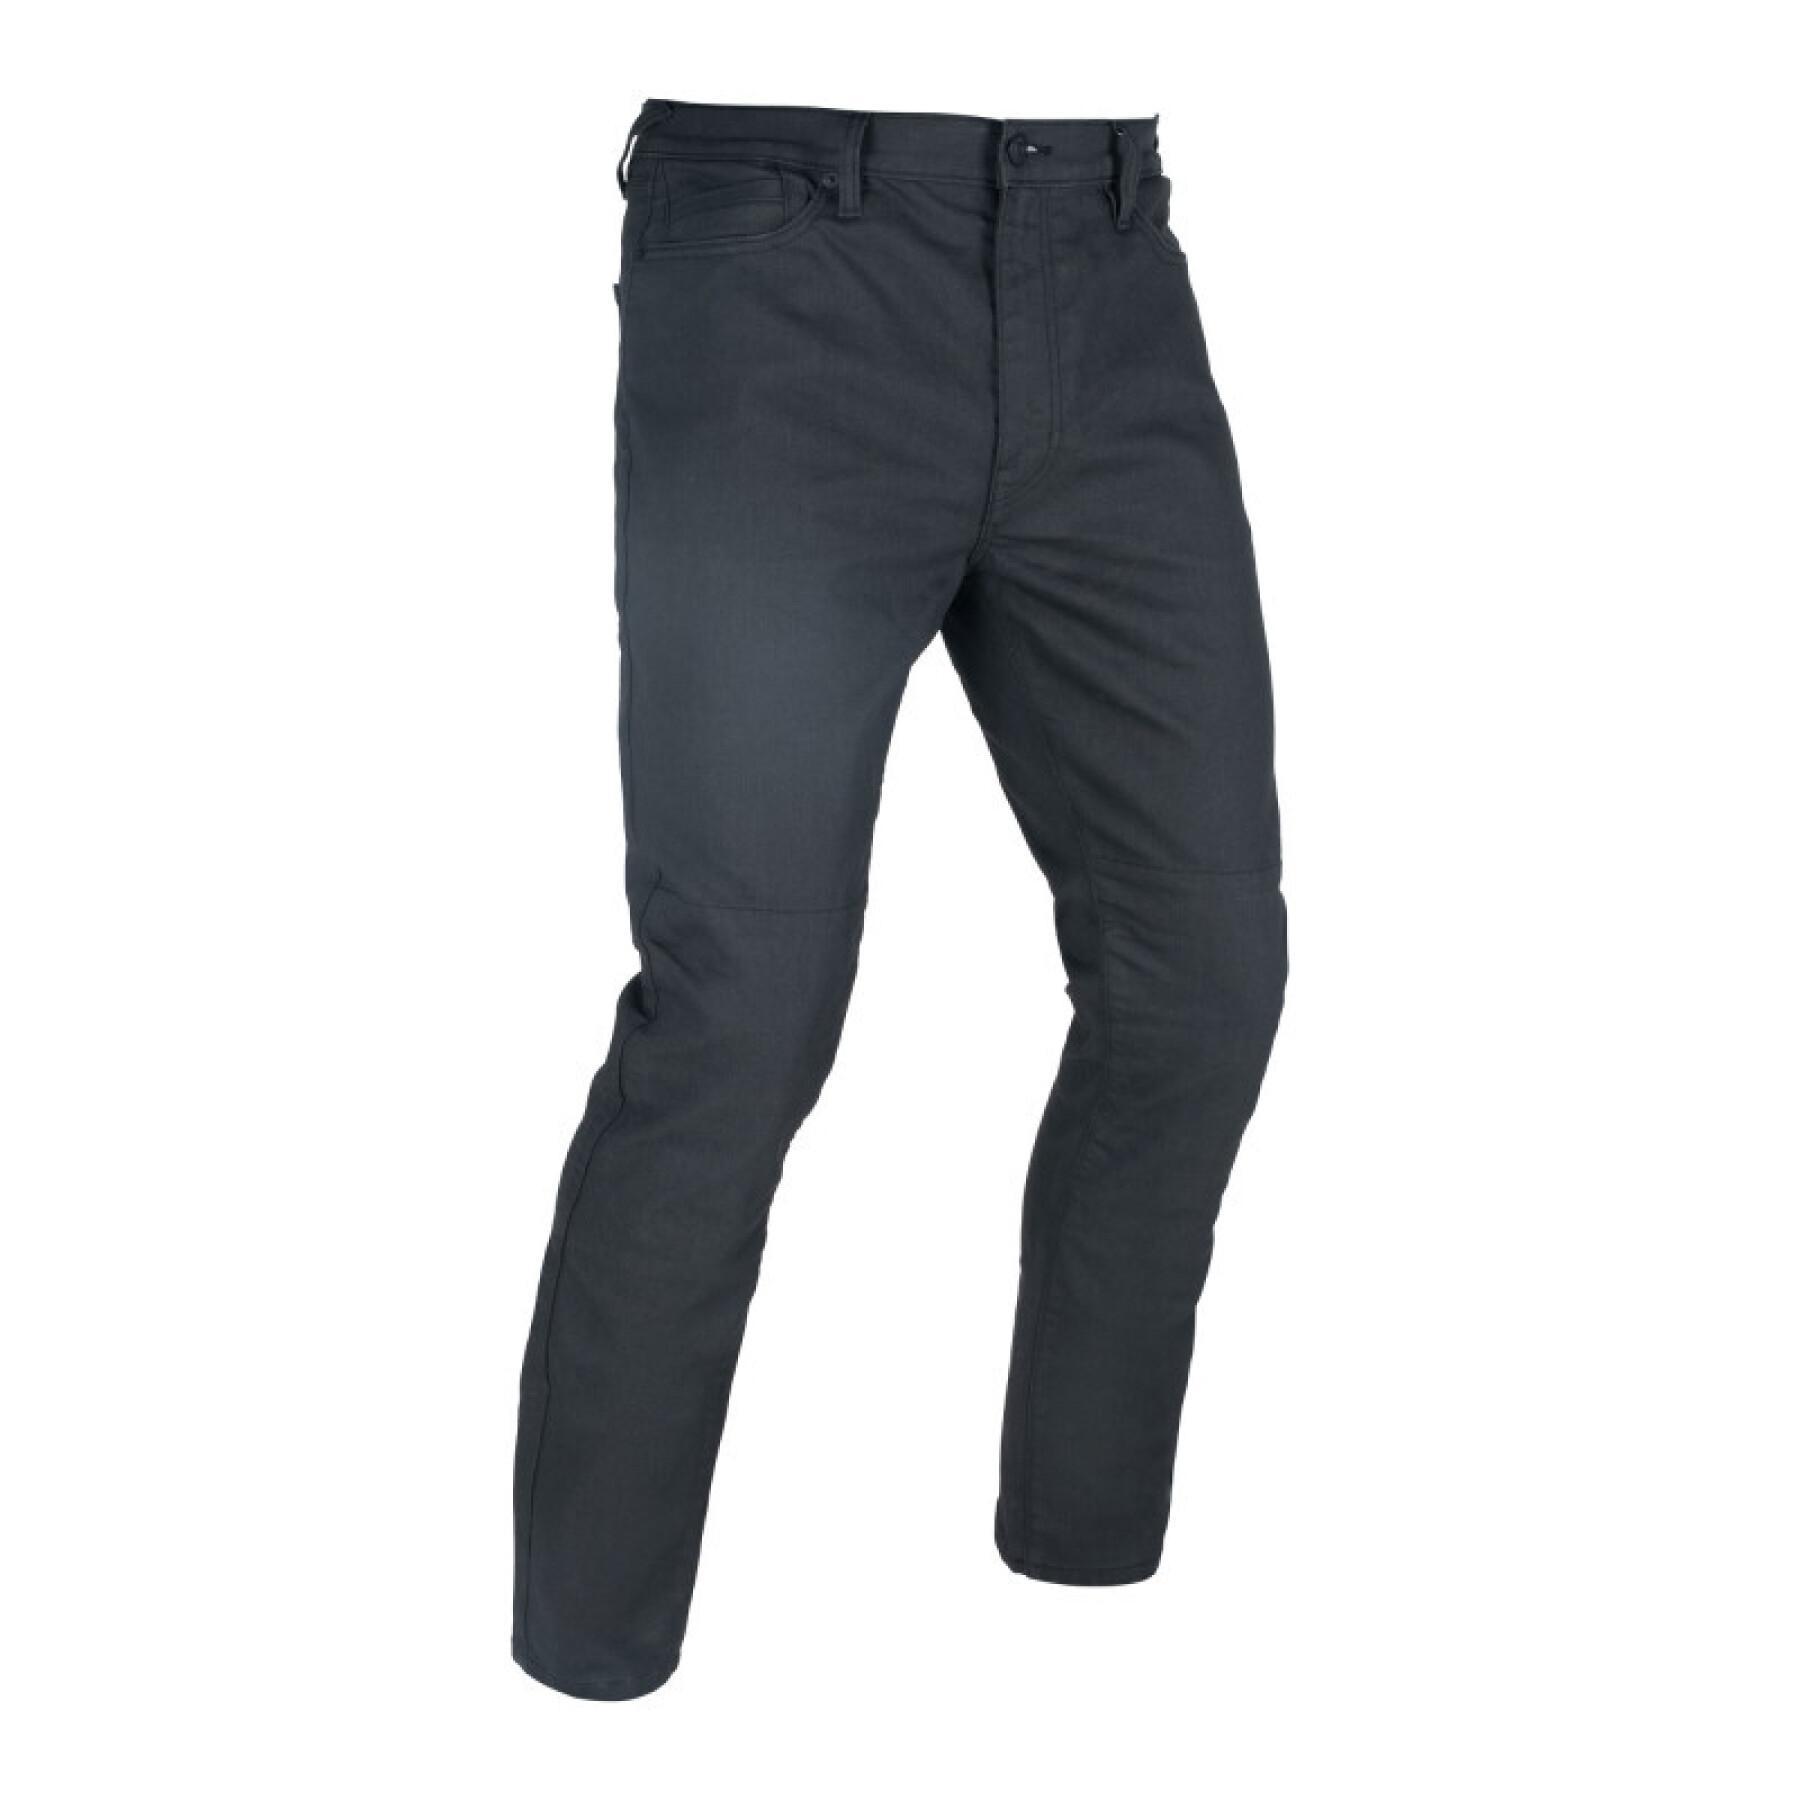 Straight moto Jeans Oxford Original Approved AA